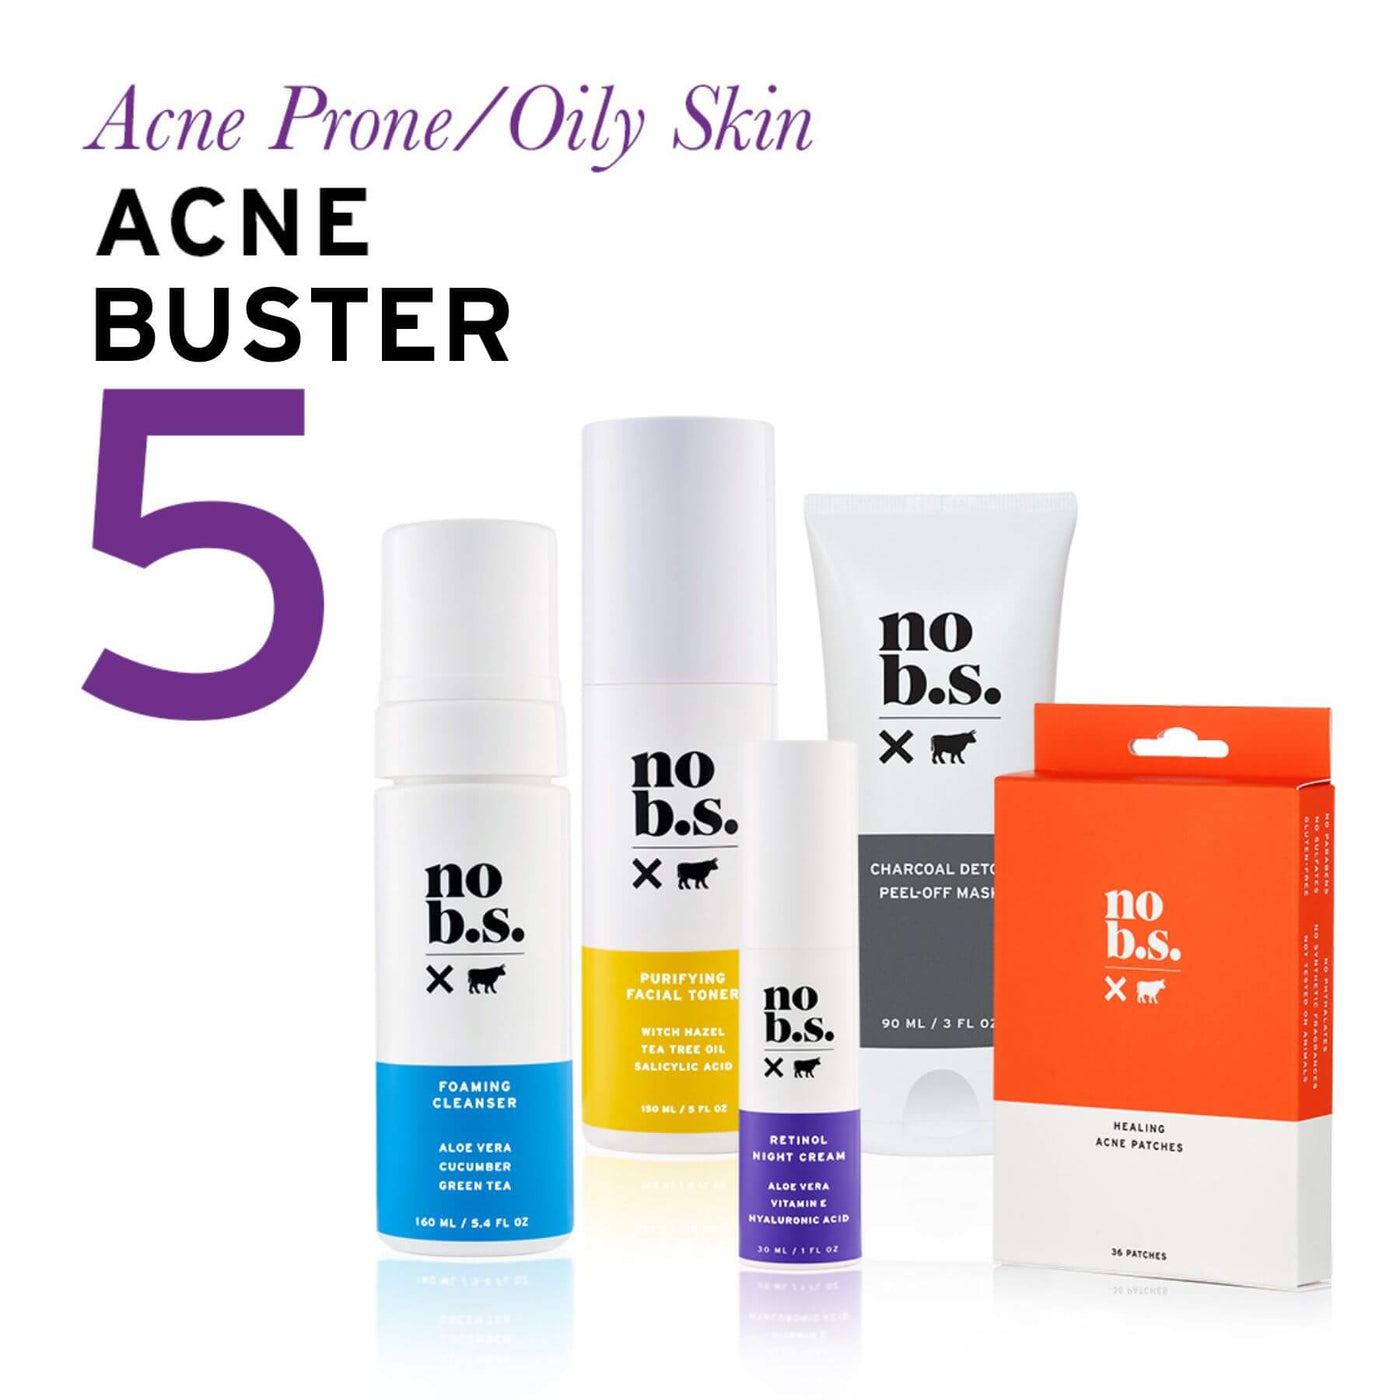 Acne Buster (5-product skincare routine for acne).